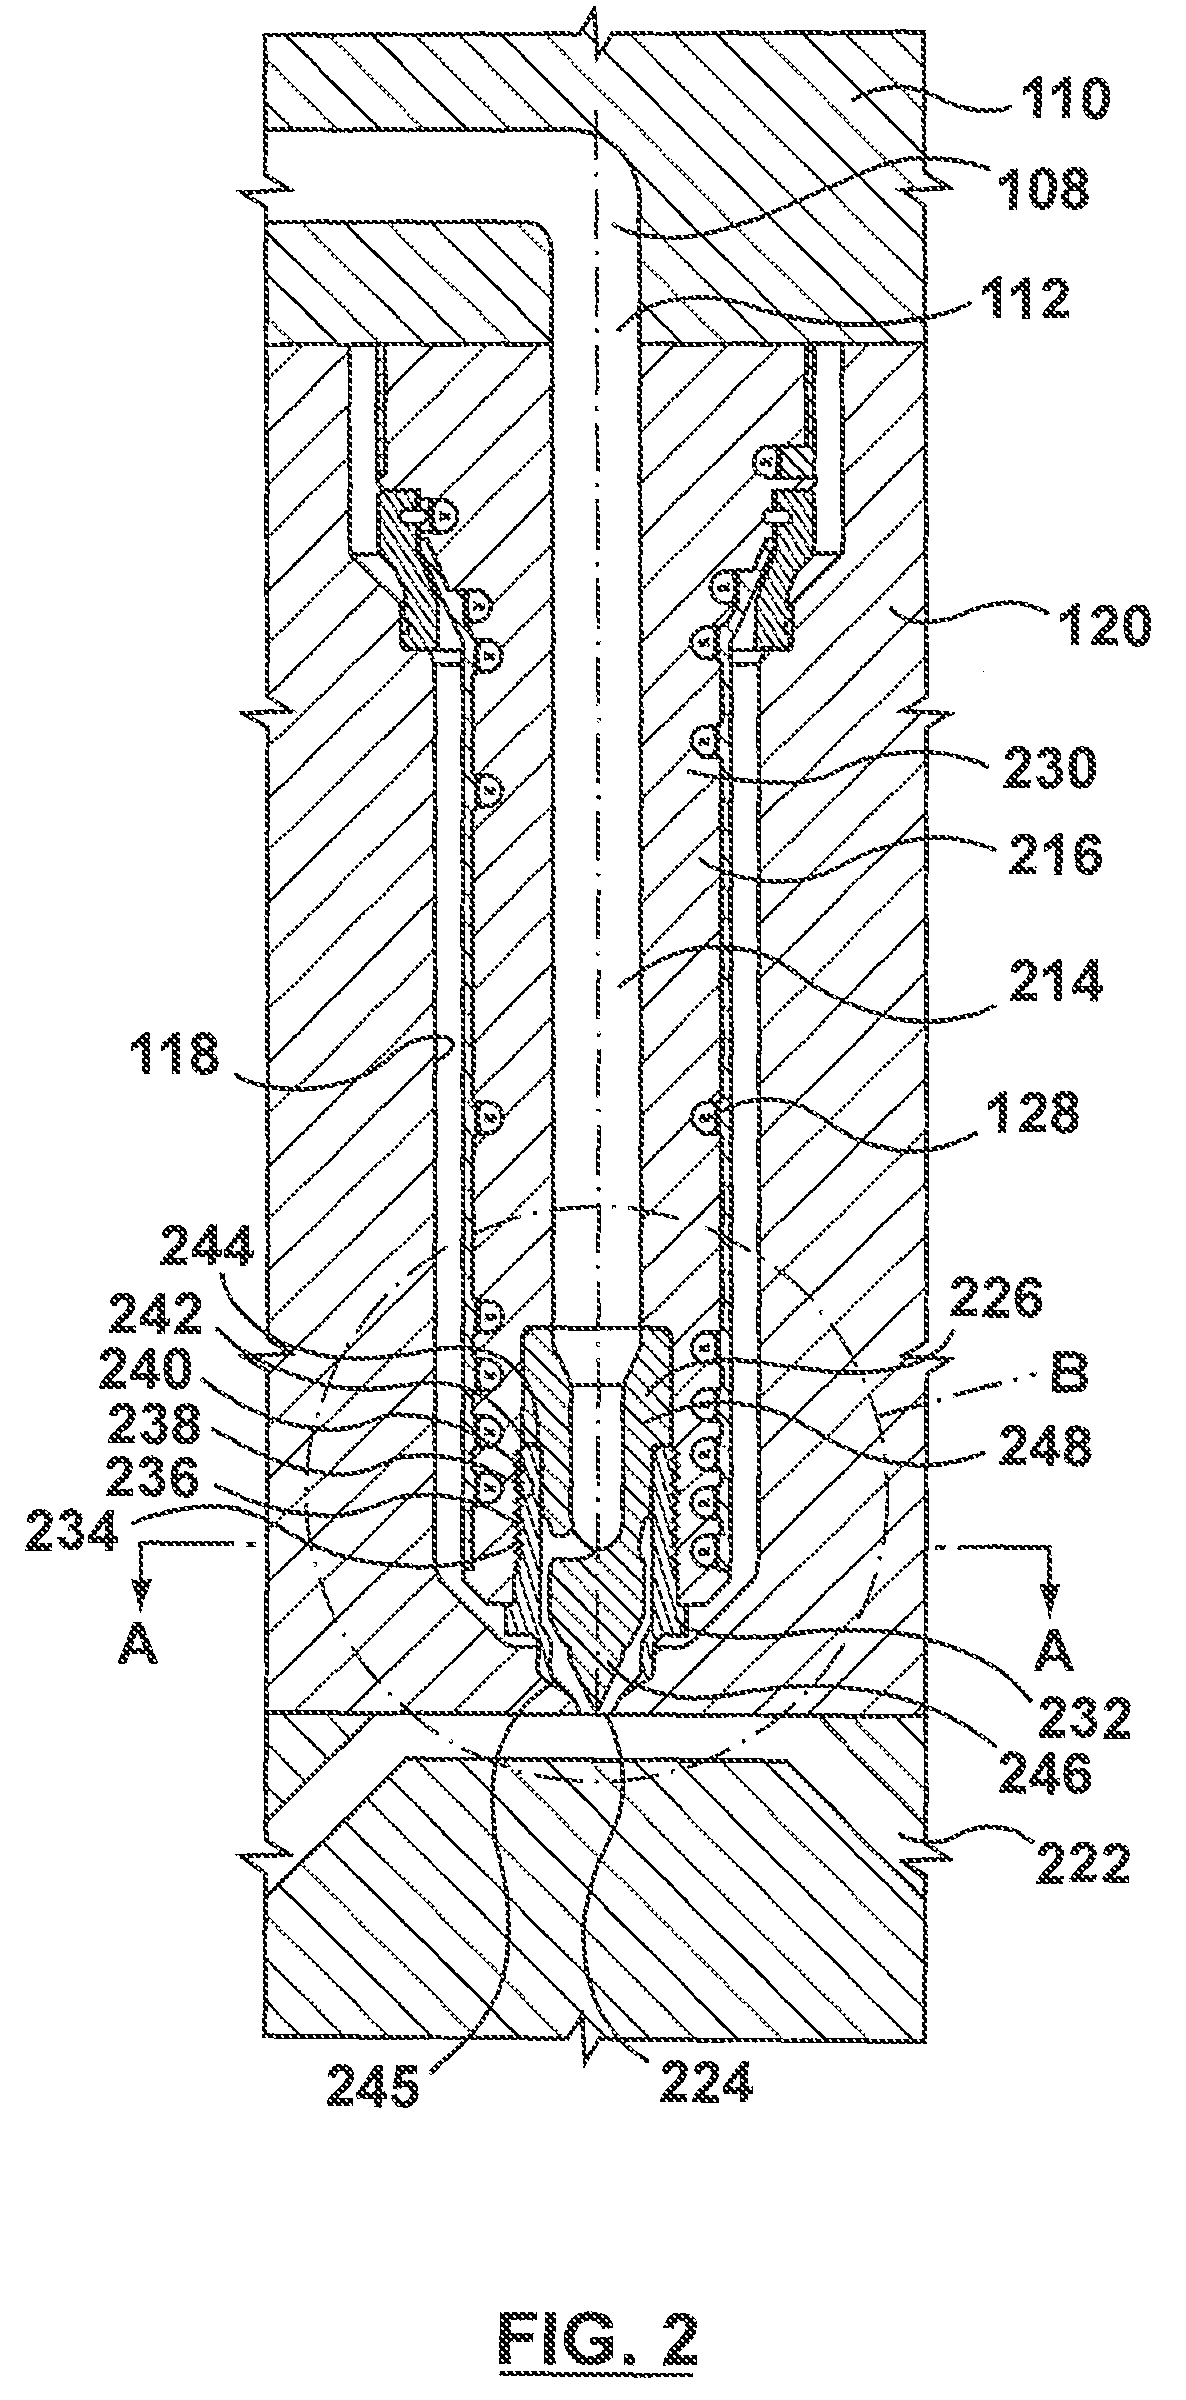 Injection molding nozzle having an annular flow tip